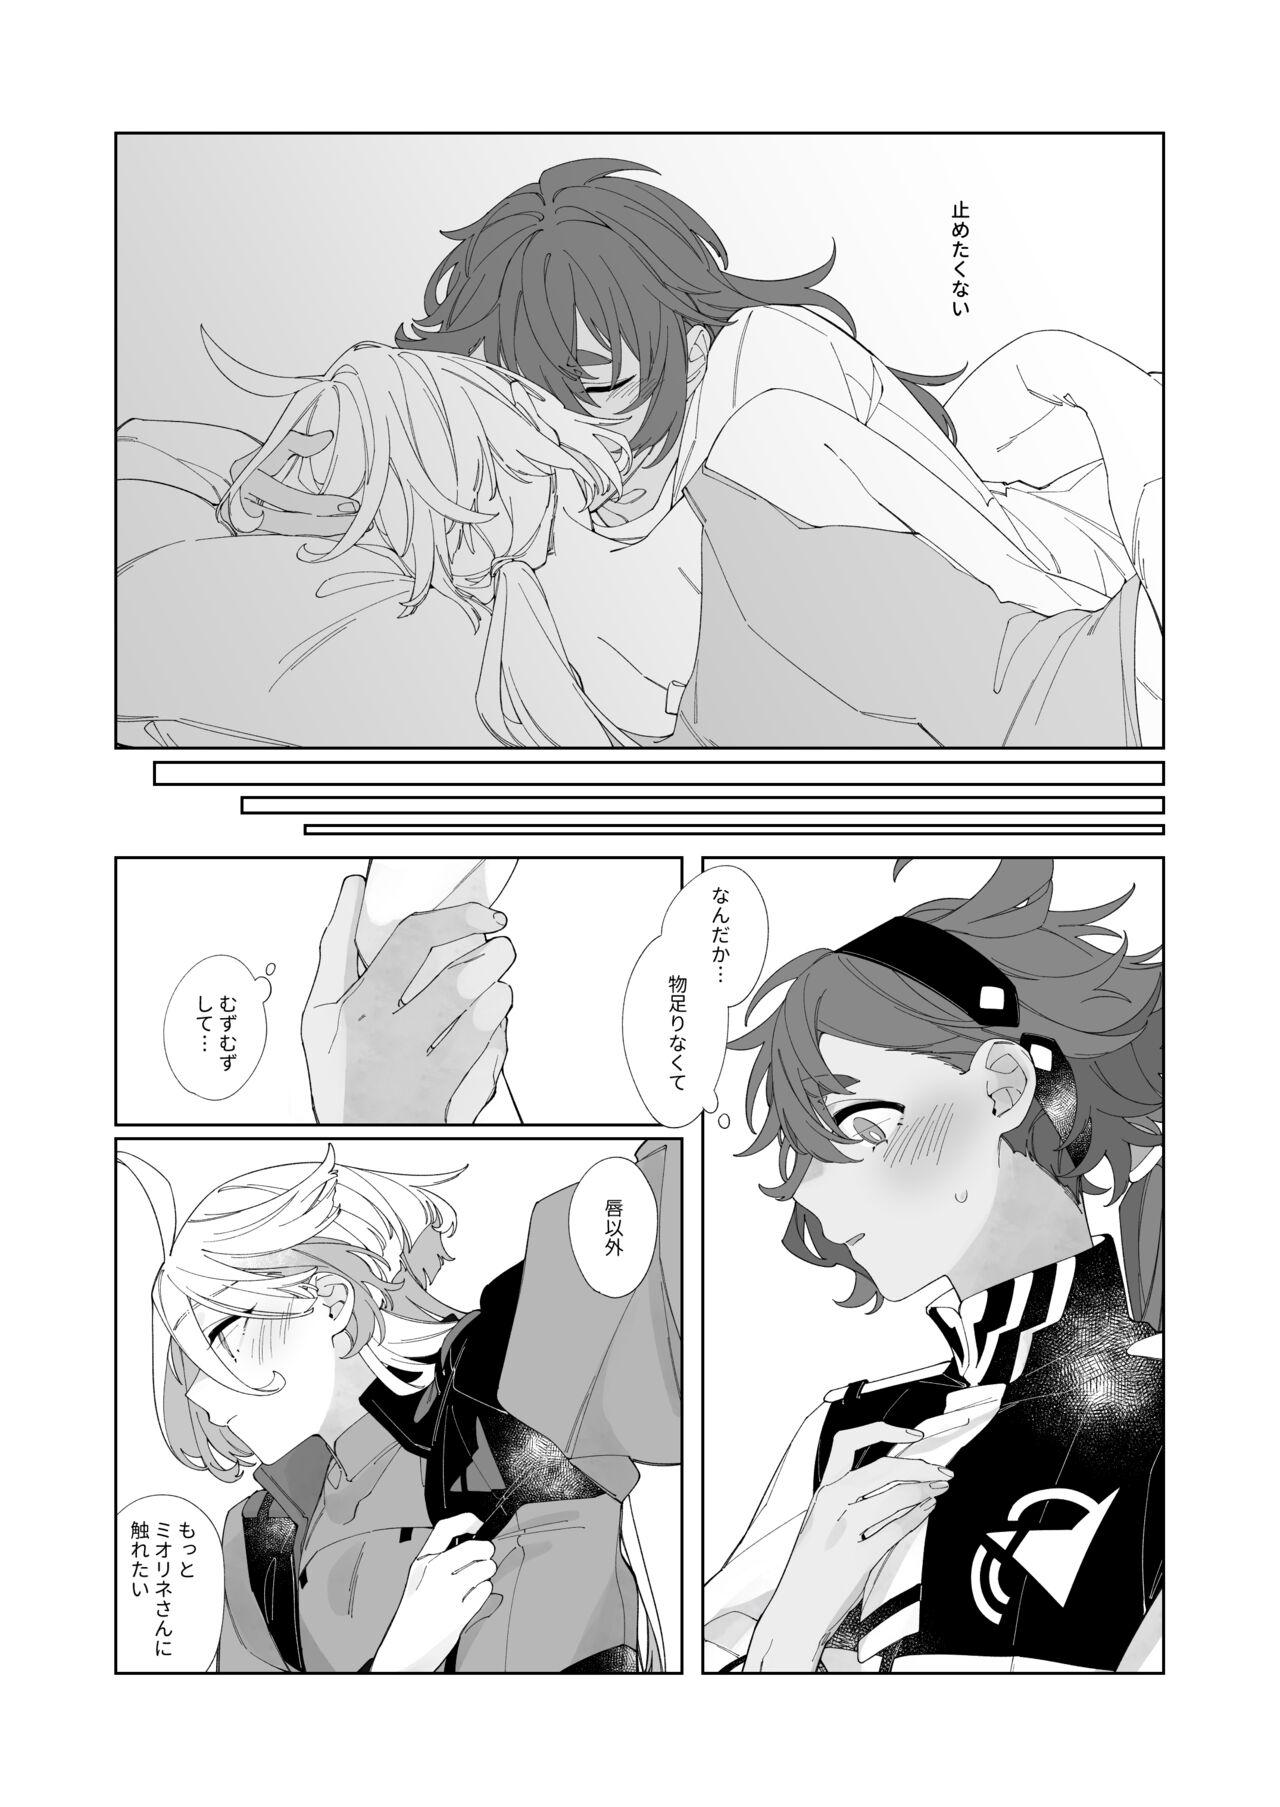 Chica Kiss no Ato Nani ga Shitai? - After kissing, what else do you want to do? - Mobile suit gundam the witch from mercury Backshots - Page 10